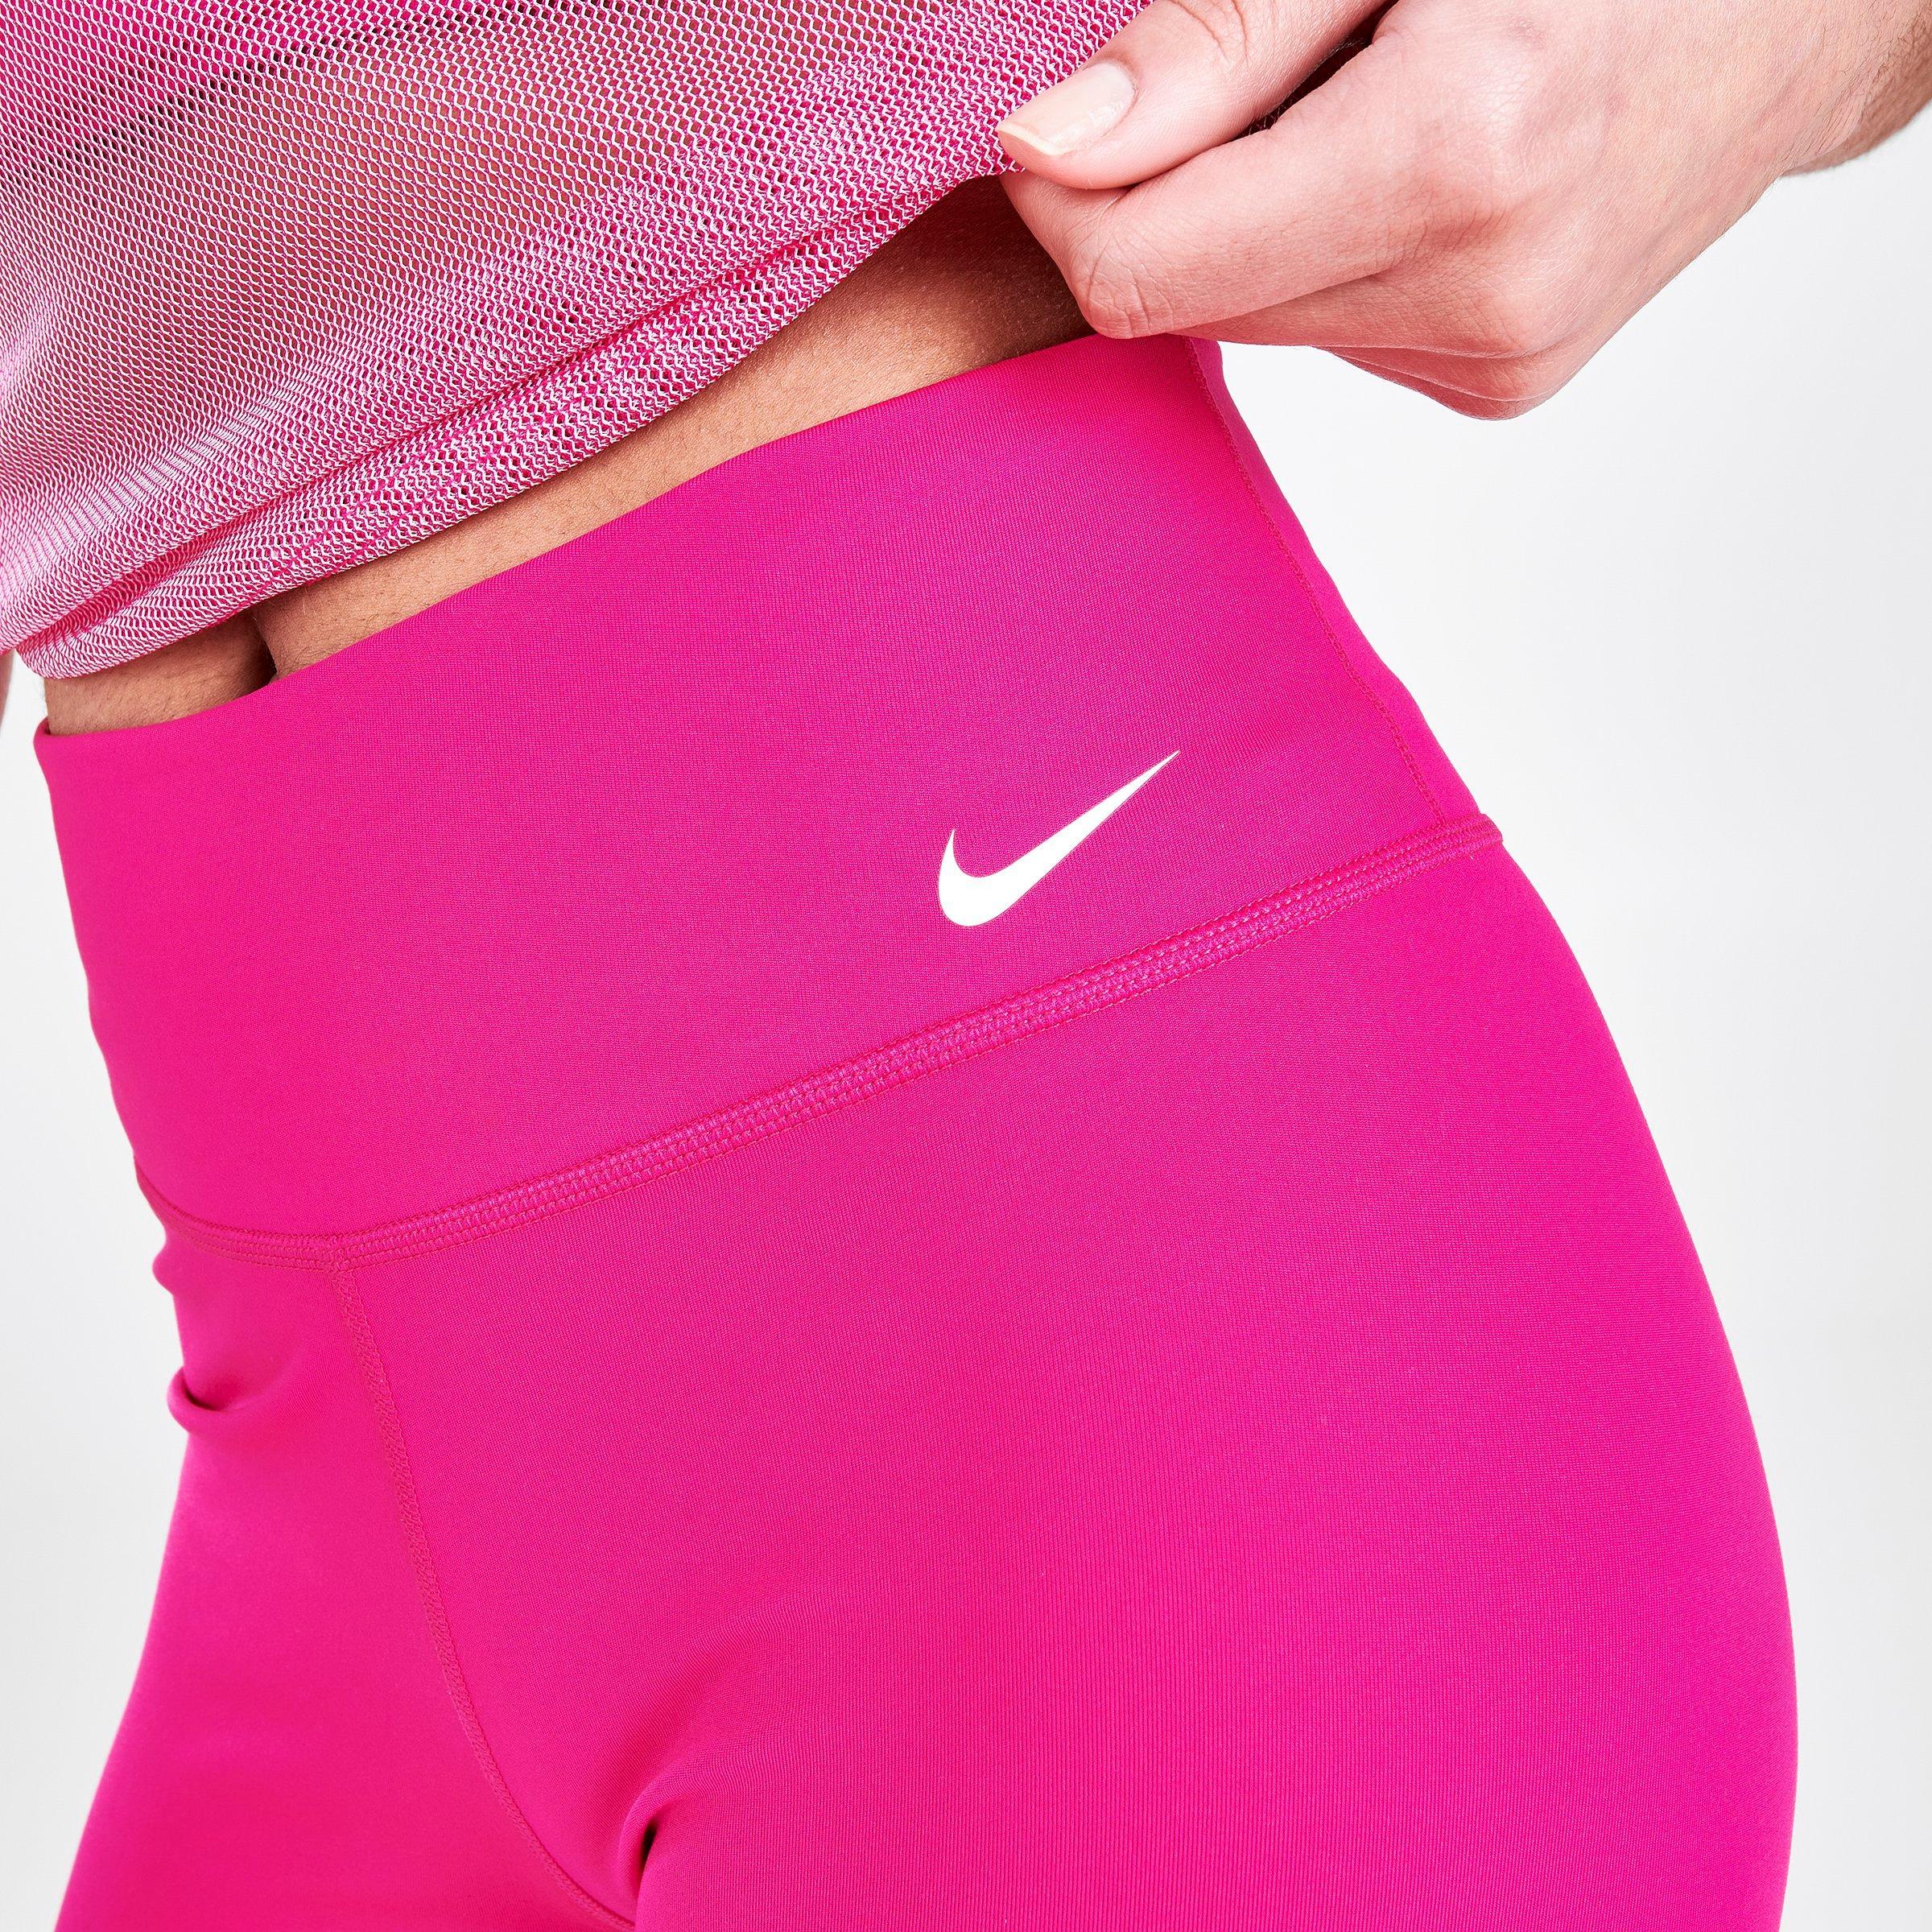 the nike one tight fit shorts